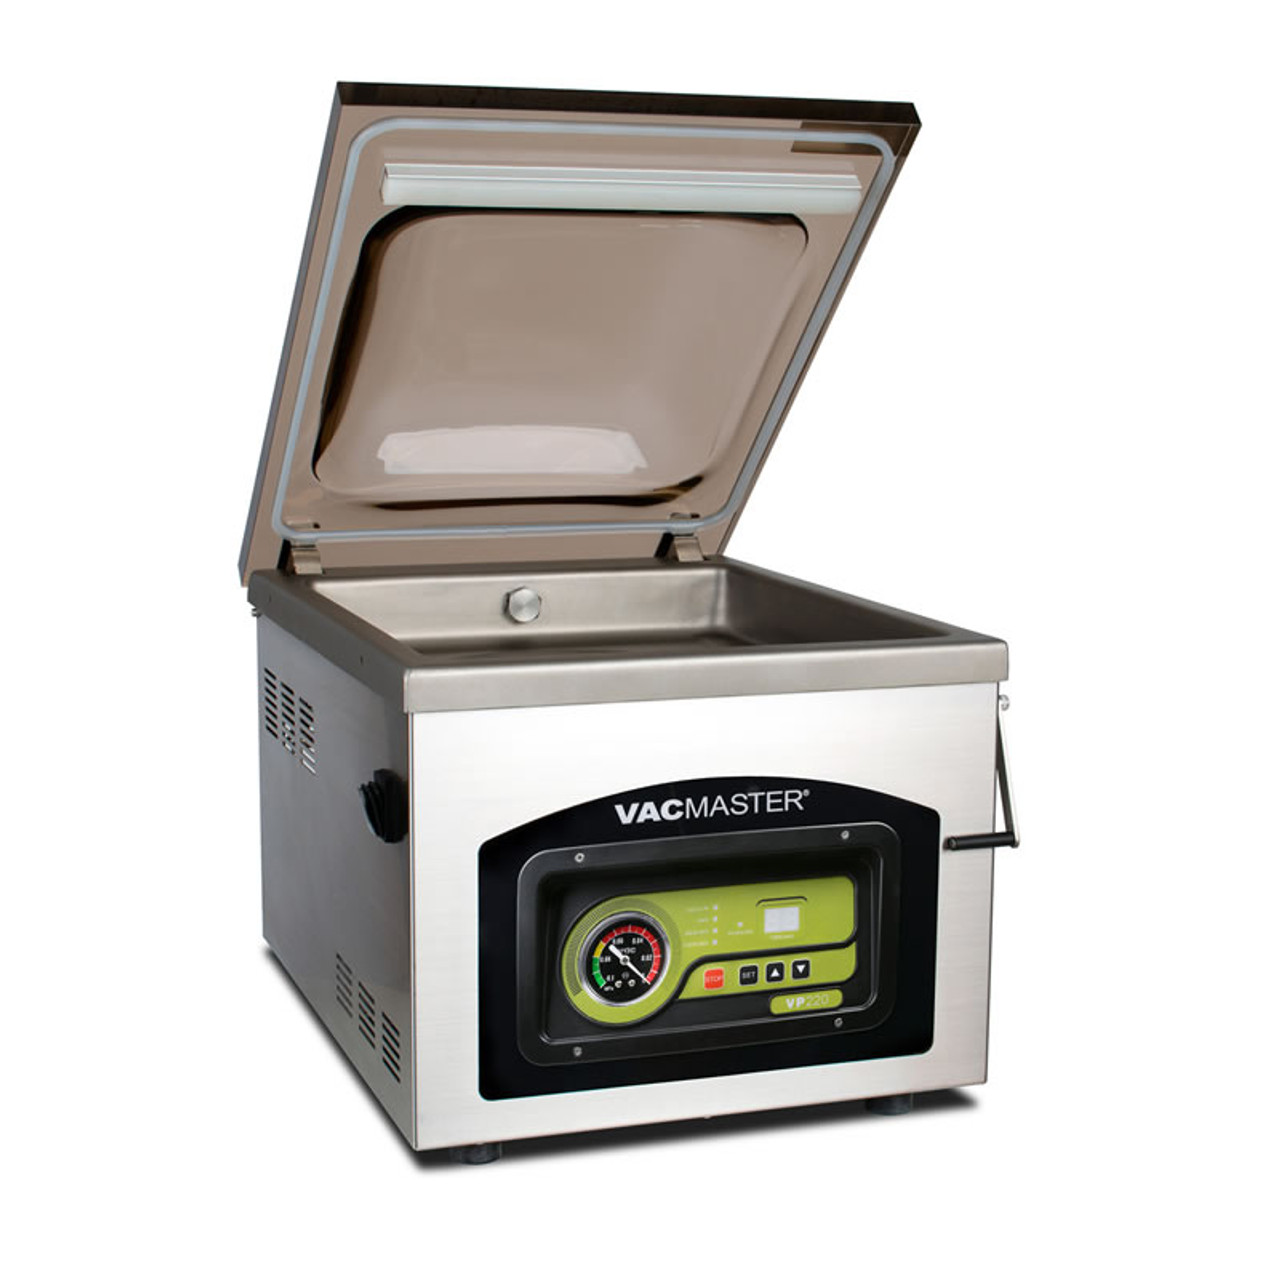 Live - Review of the Vacmaster VP215 Chamber Vacuum Sealer